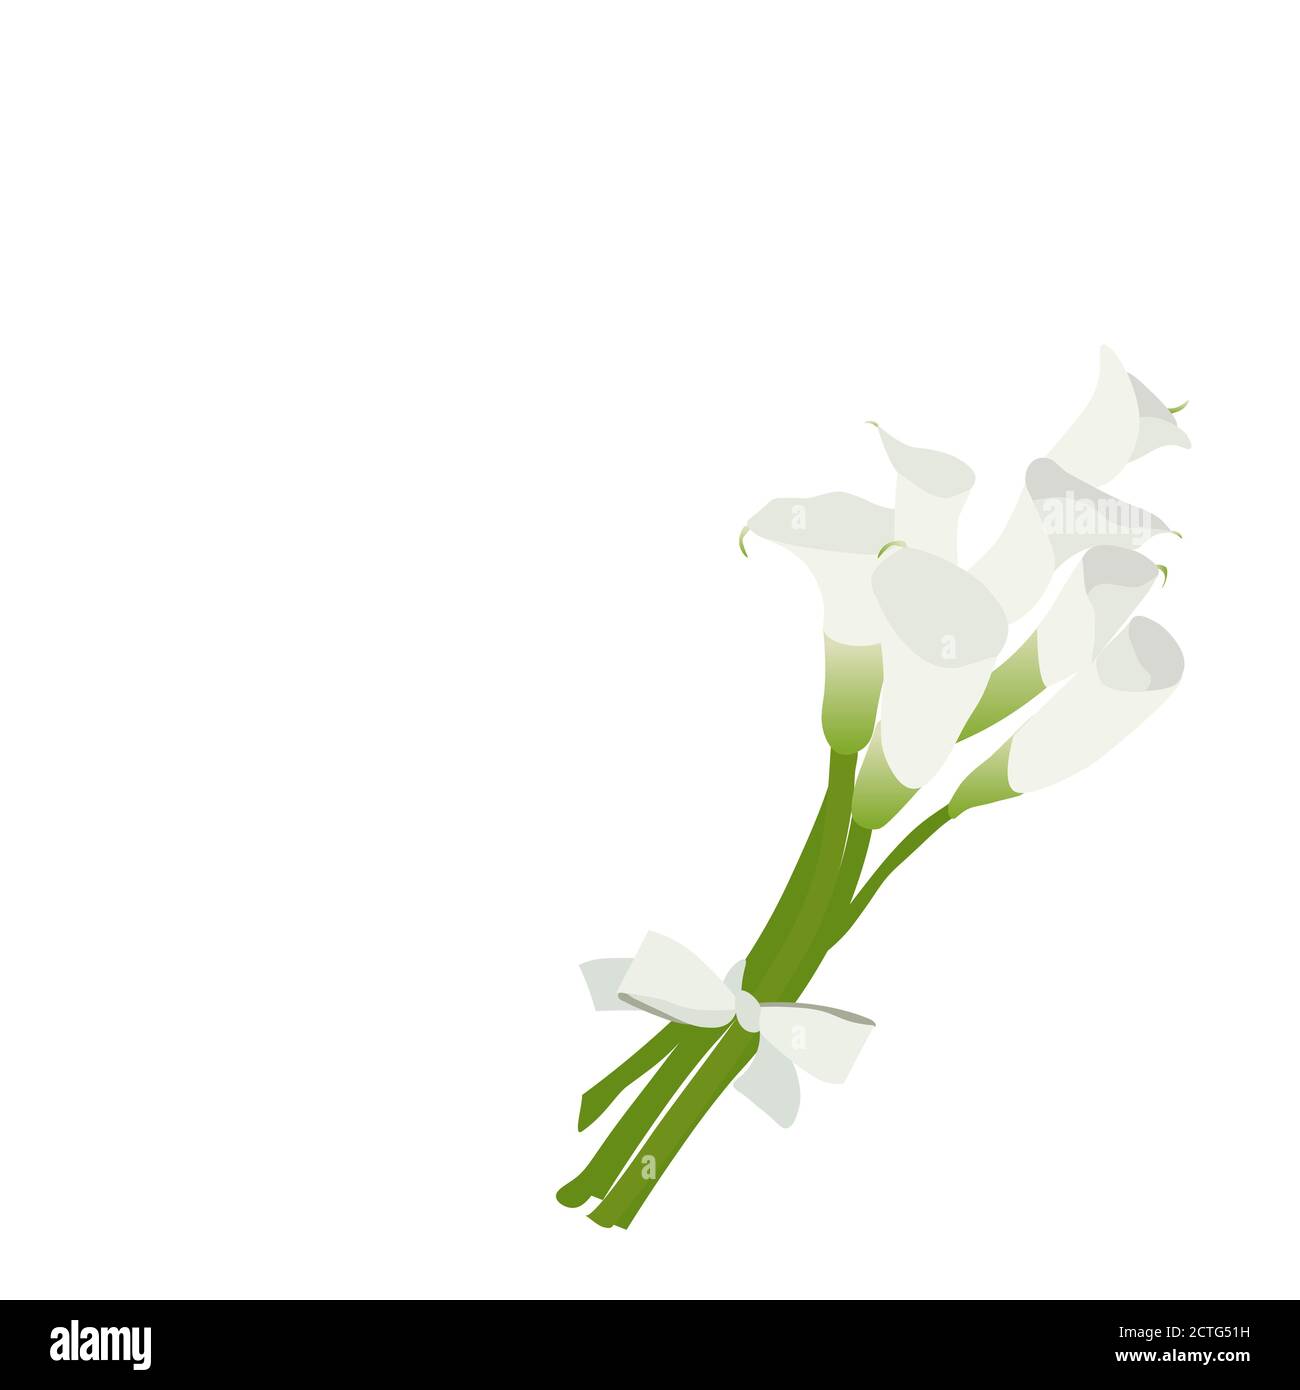 Bouquet of white calla lilies with white silk bow isolated on white background. Card with wedding bouquet for wedding decoration. Stock Vector